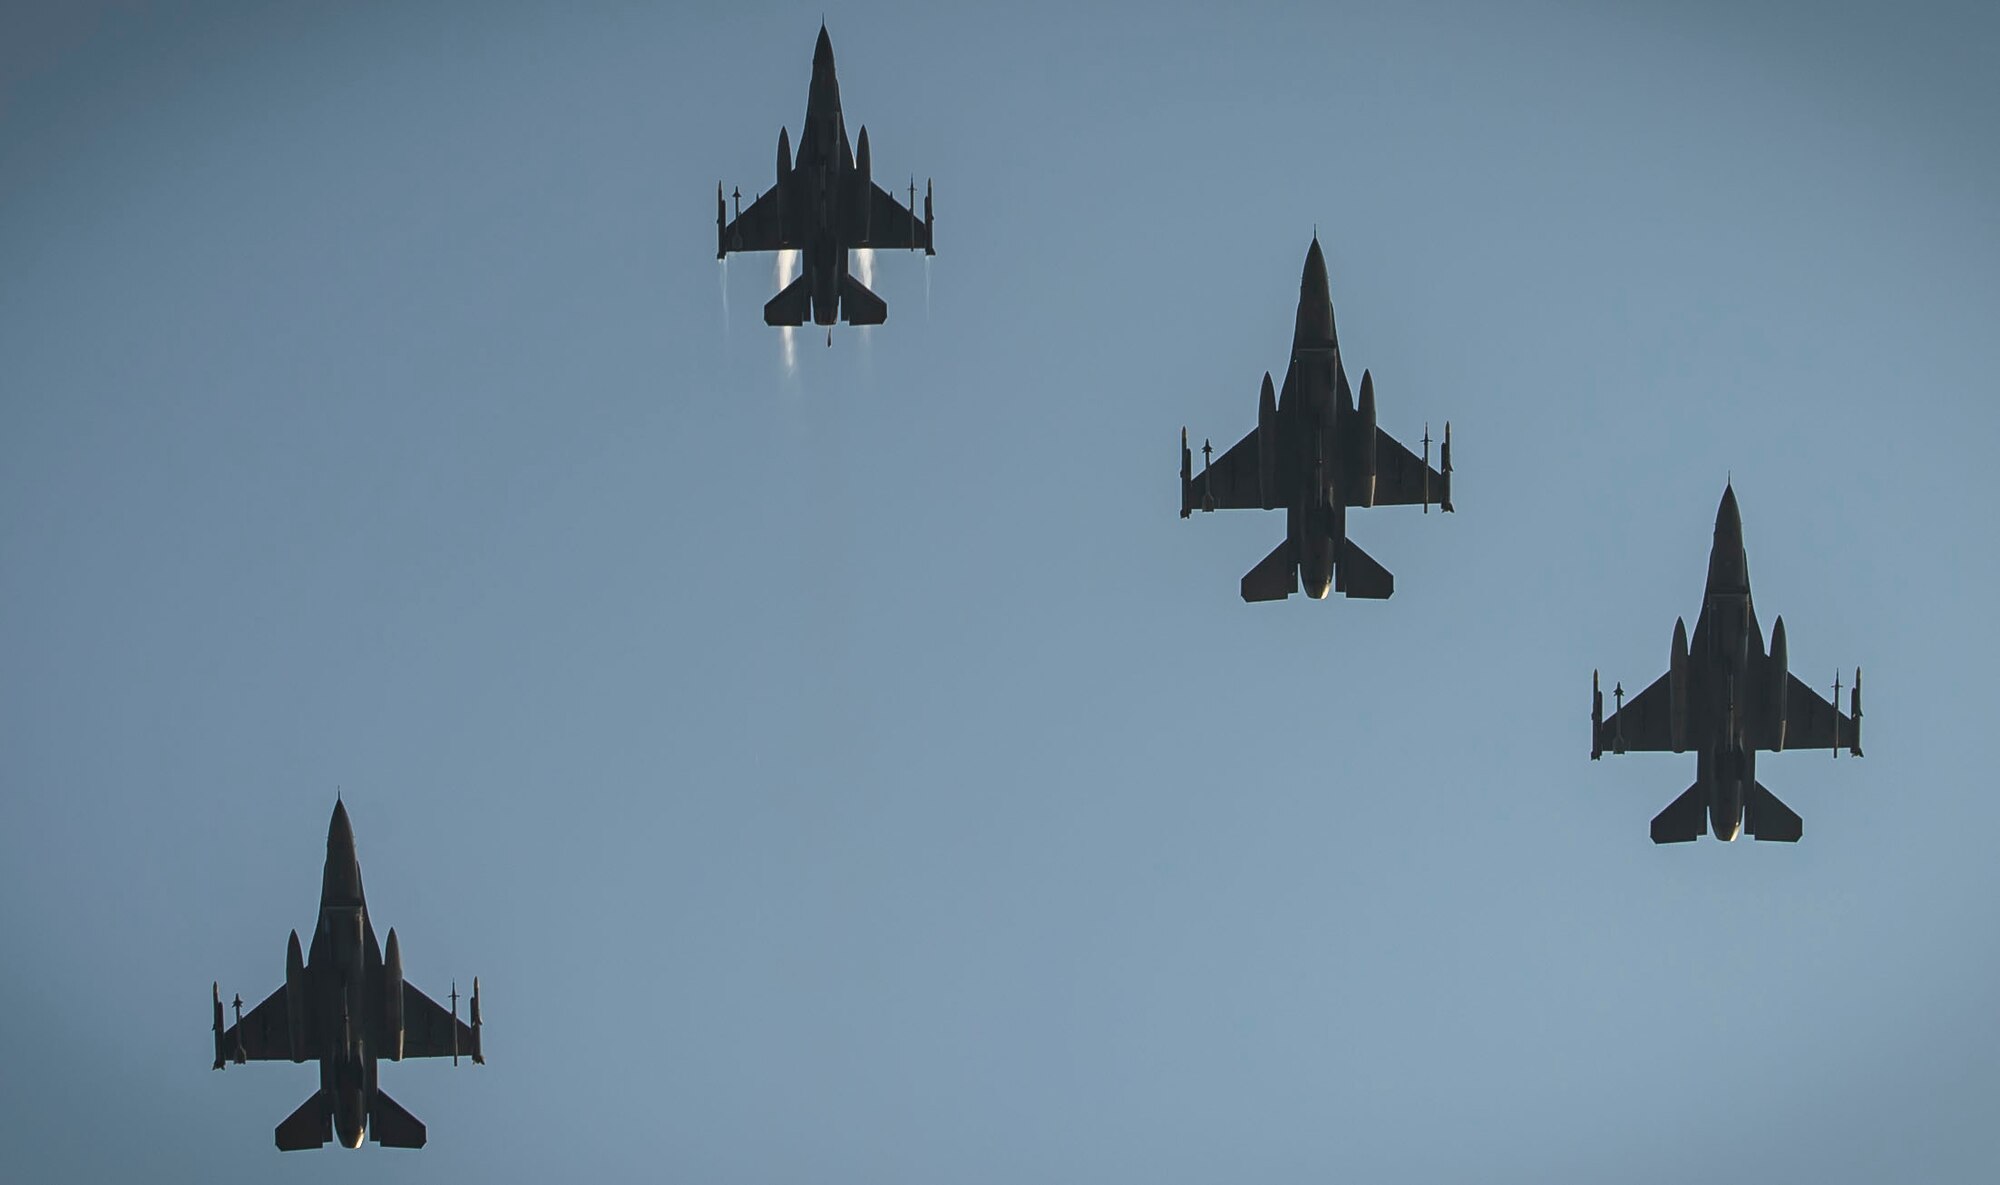 U.S. Air Force F-16CM Fighting Falcon pilots perform a missing man formation fly over during a POW/MIA ceremony at Shaw Air Force Base, S.C., Sept. 21, 2018.